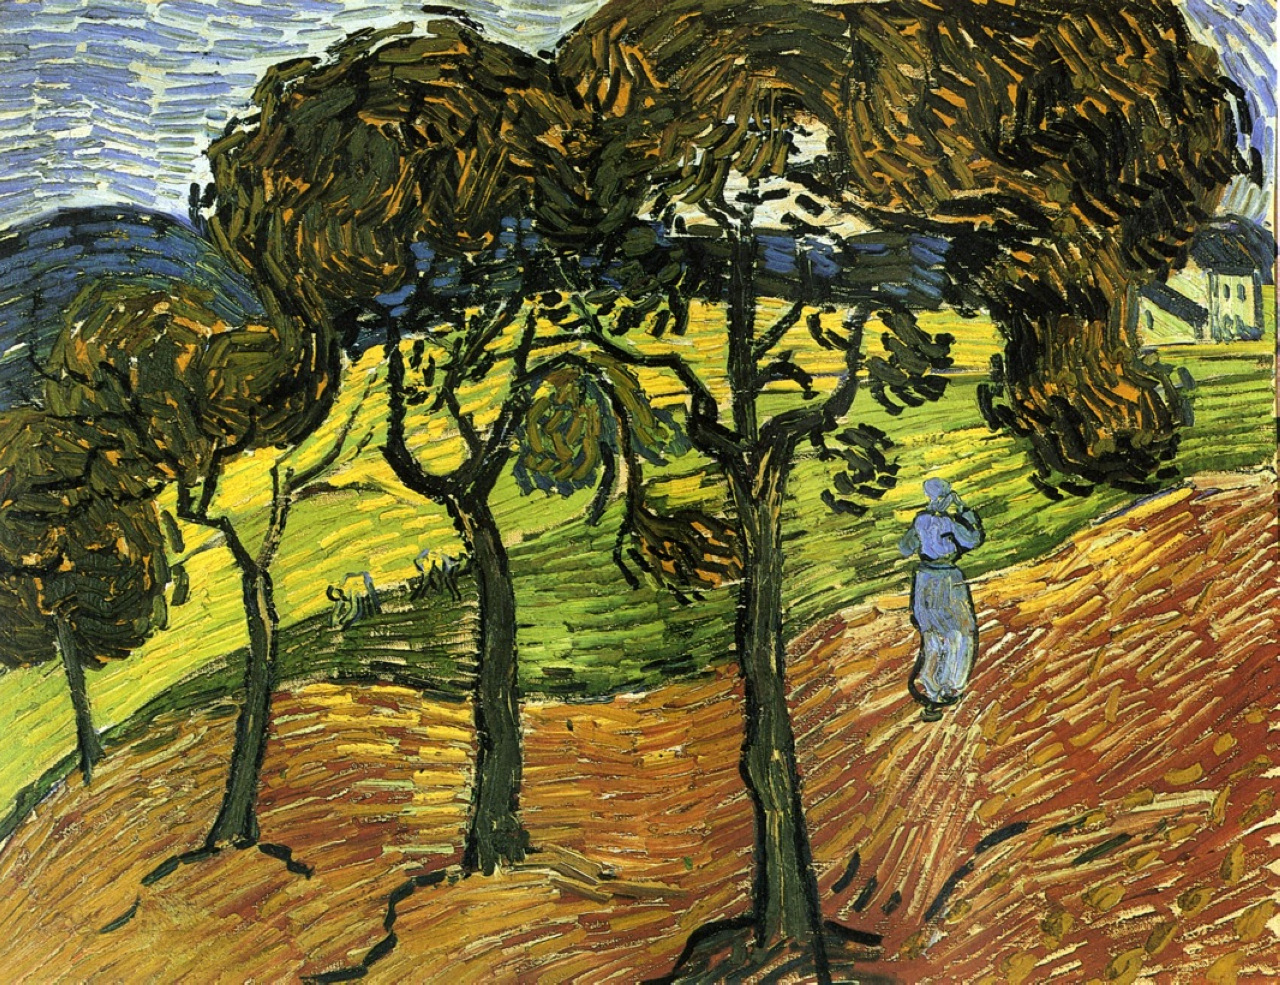 Landscape with Trees and Figures, 1889 - Vincent van Gogh - WikiArt.org